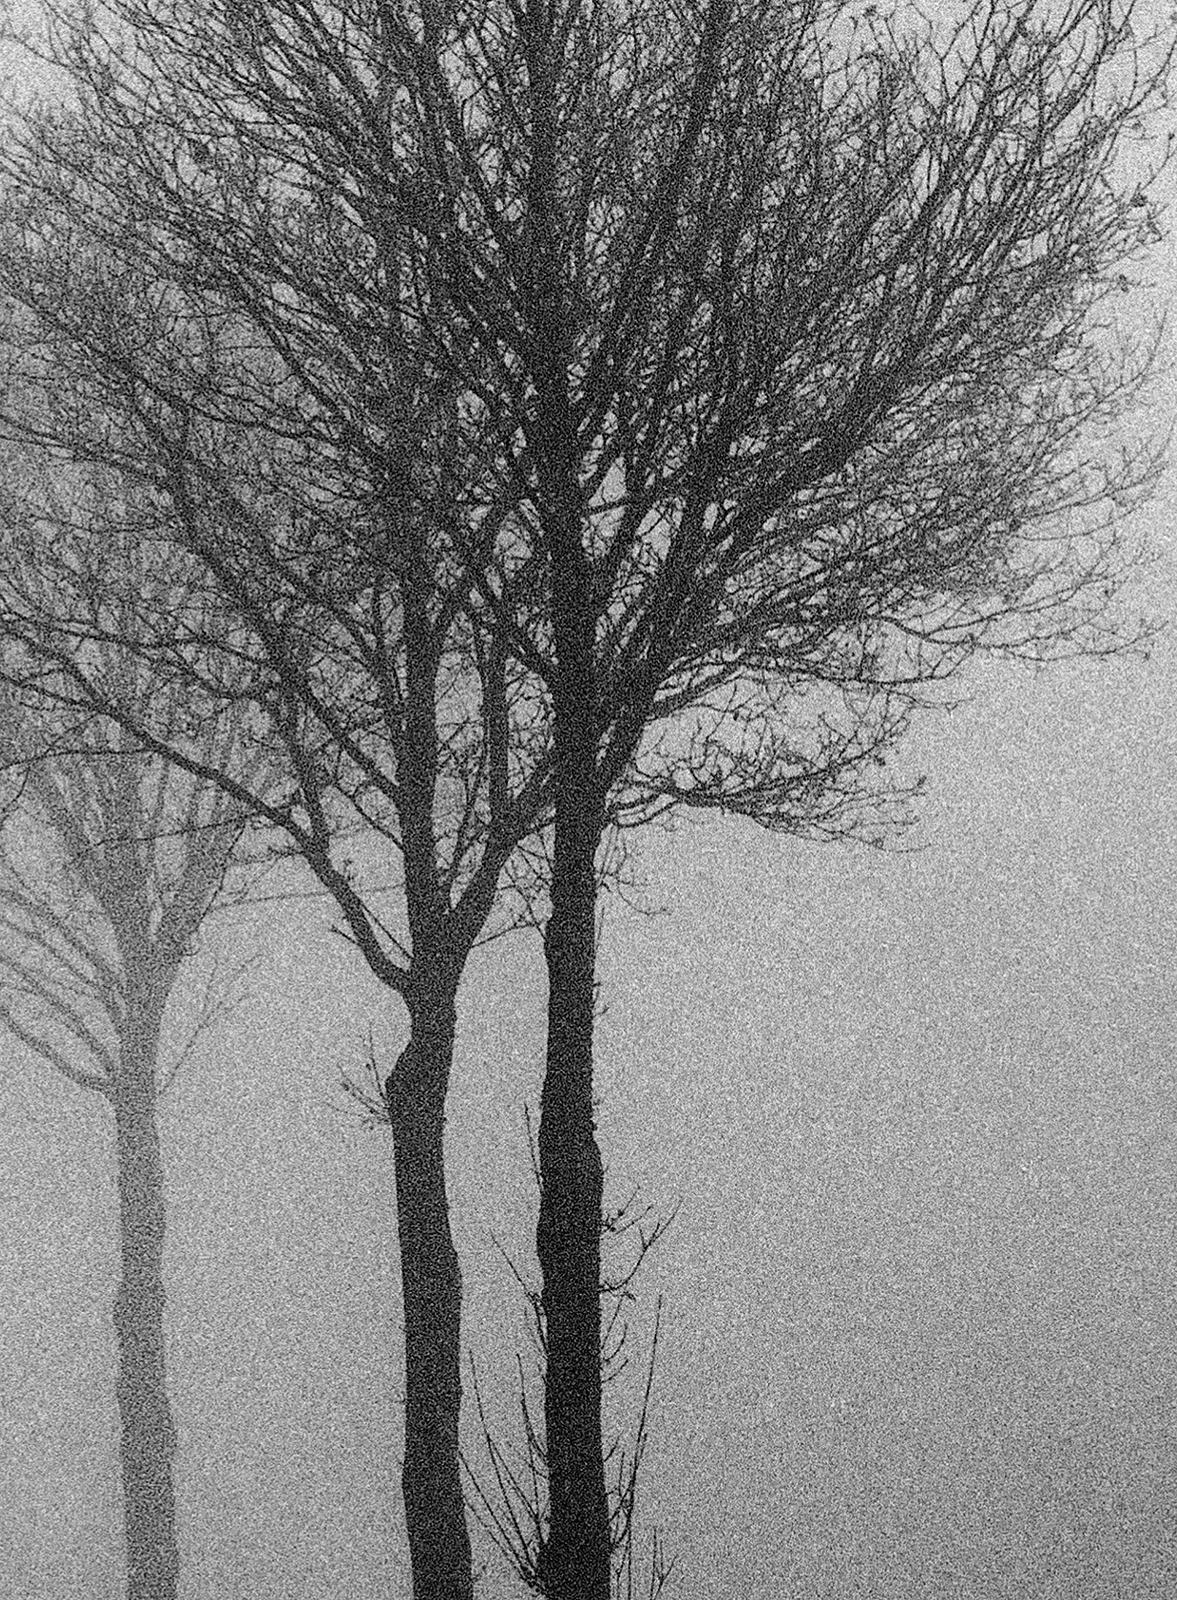 3 Trees -Signed limited edition nature print, Black white photo, Misty landscape - Photograph by Ian Sanderson